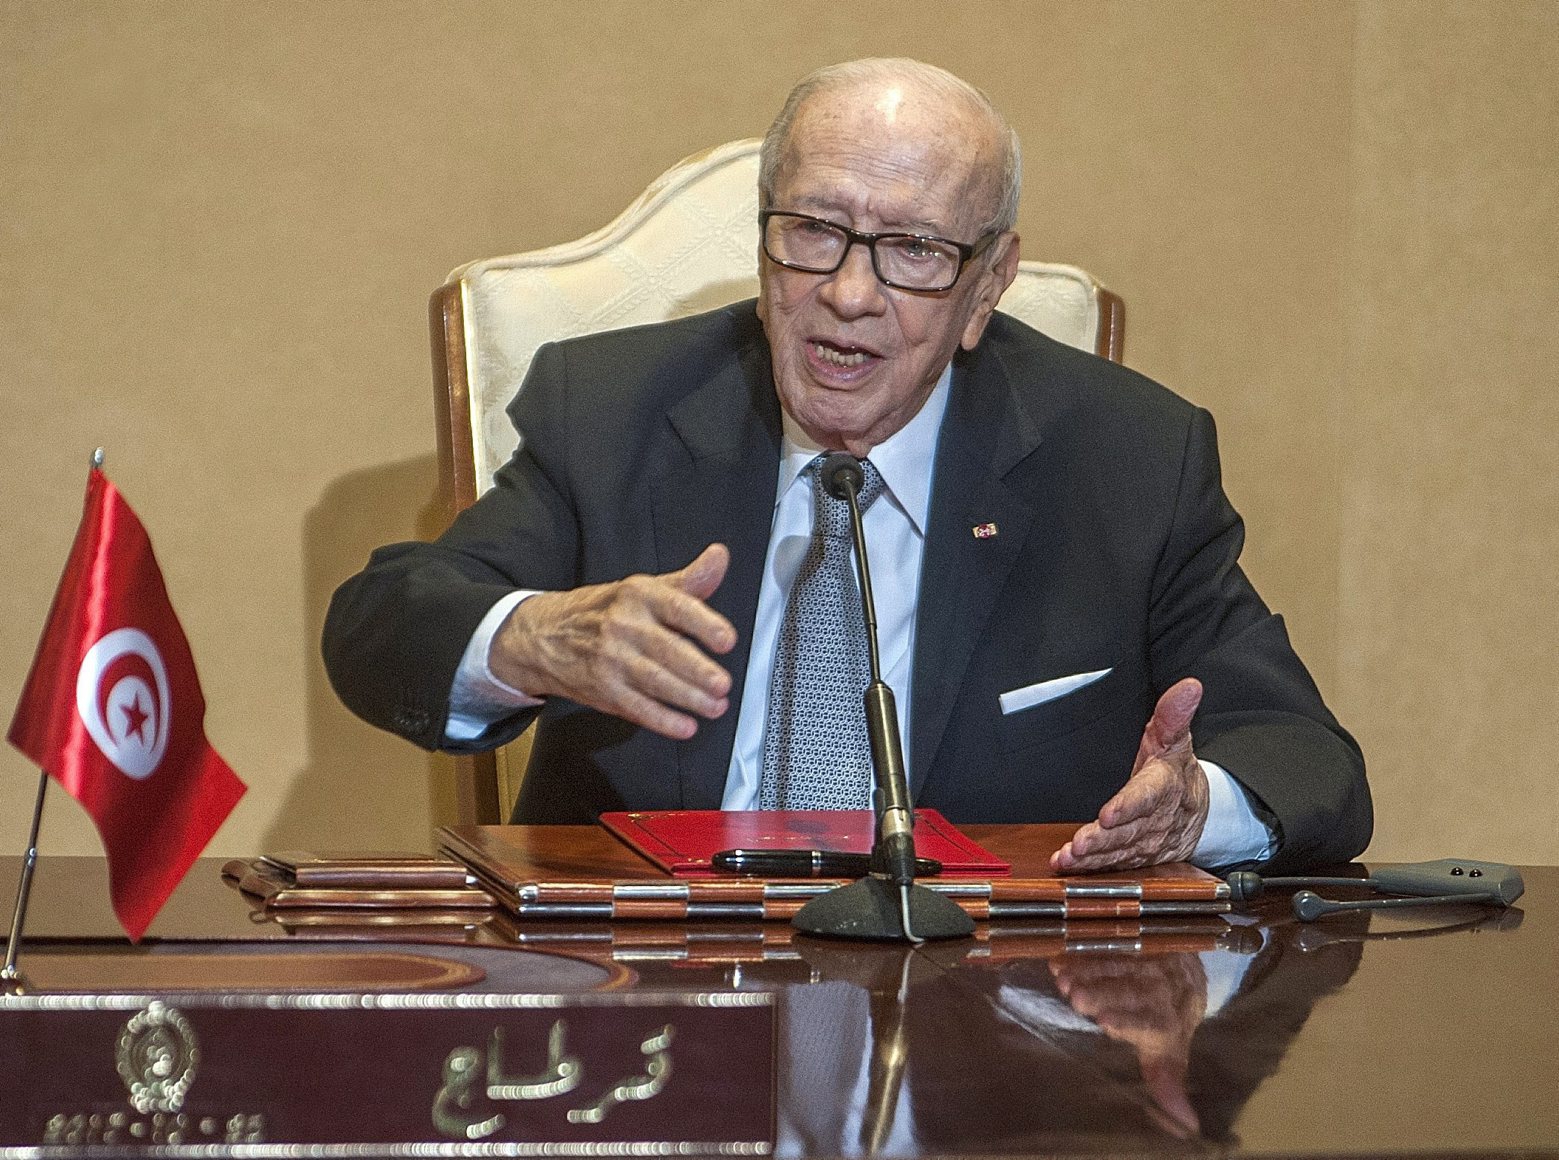 FILE - In this Thursday, Oct. 25, 2018 file photo Tunisian President Beji Caid Essebsi gestures during a press conference in Tunis.  Tunisian President Beji Caid Essebsi, the country's first democratically elected leader, has died at 92, his office announced Thursday July 25, 2019. (AP Photo/Hassene Dridi, FILE) Tunisia President Obit